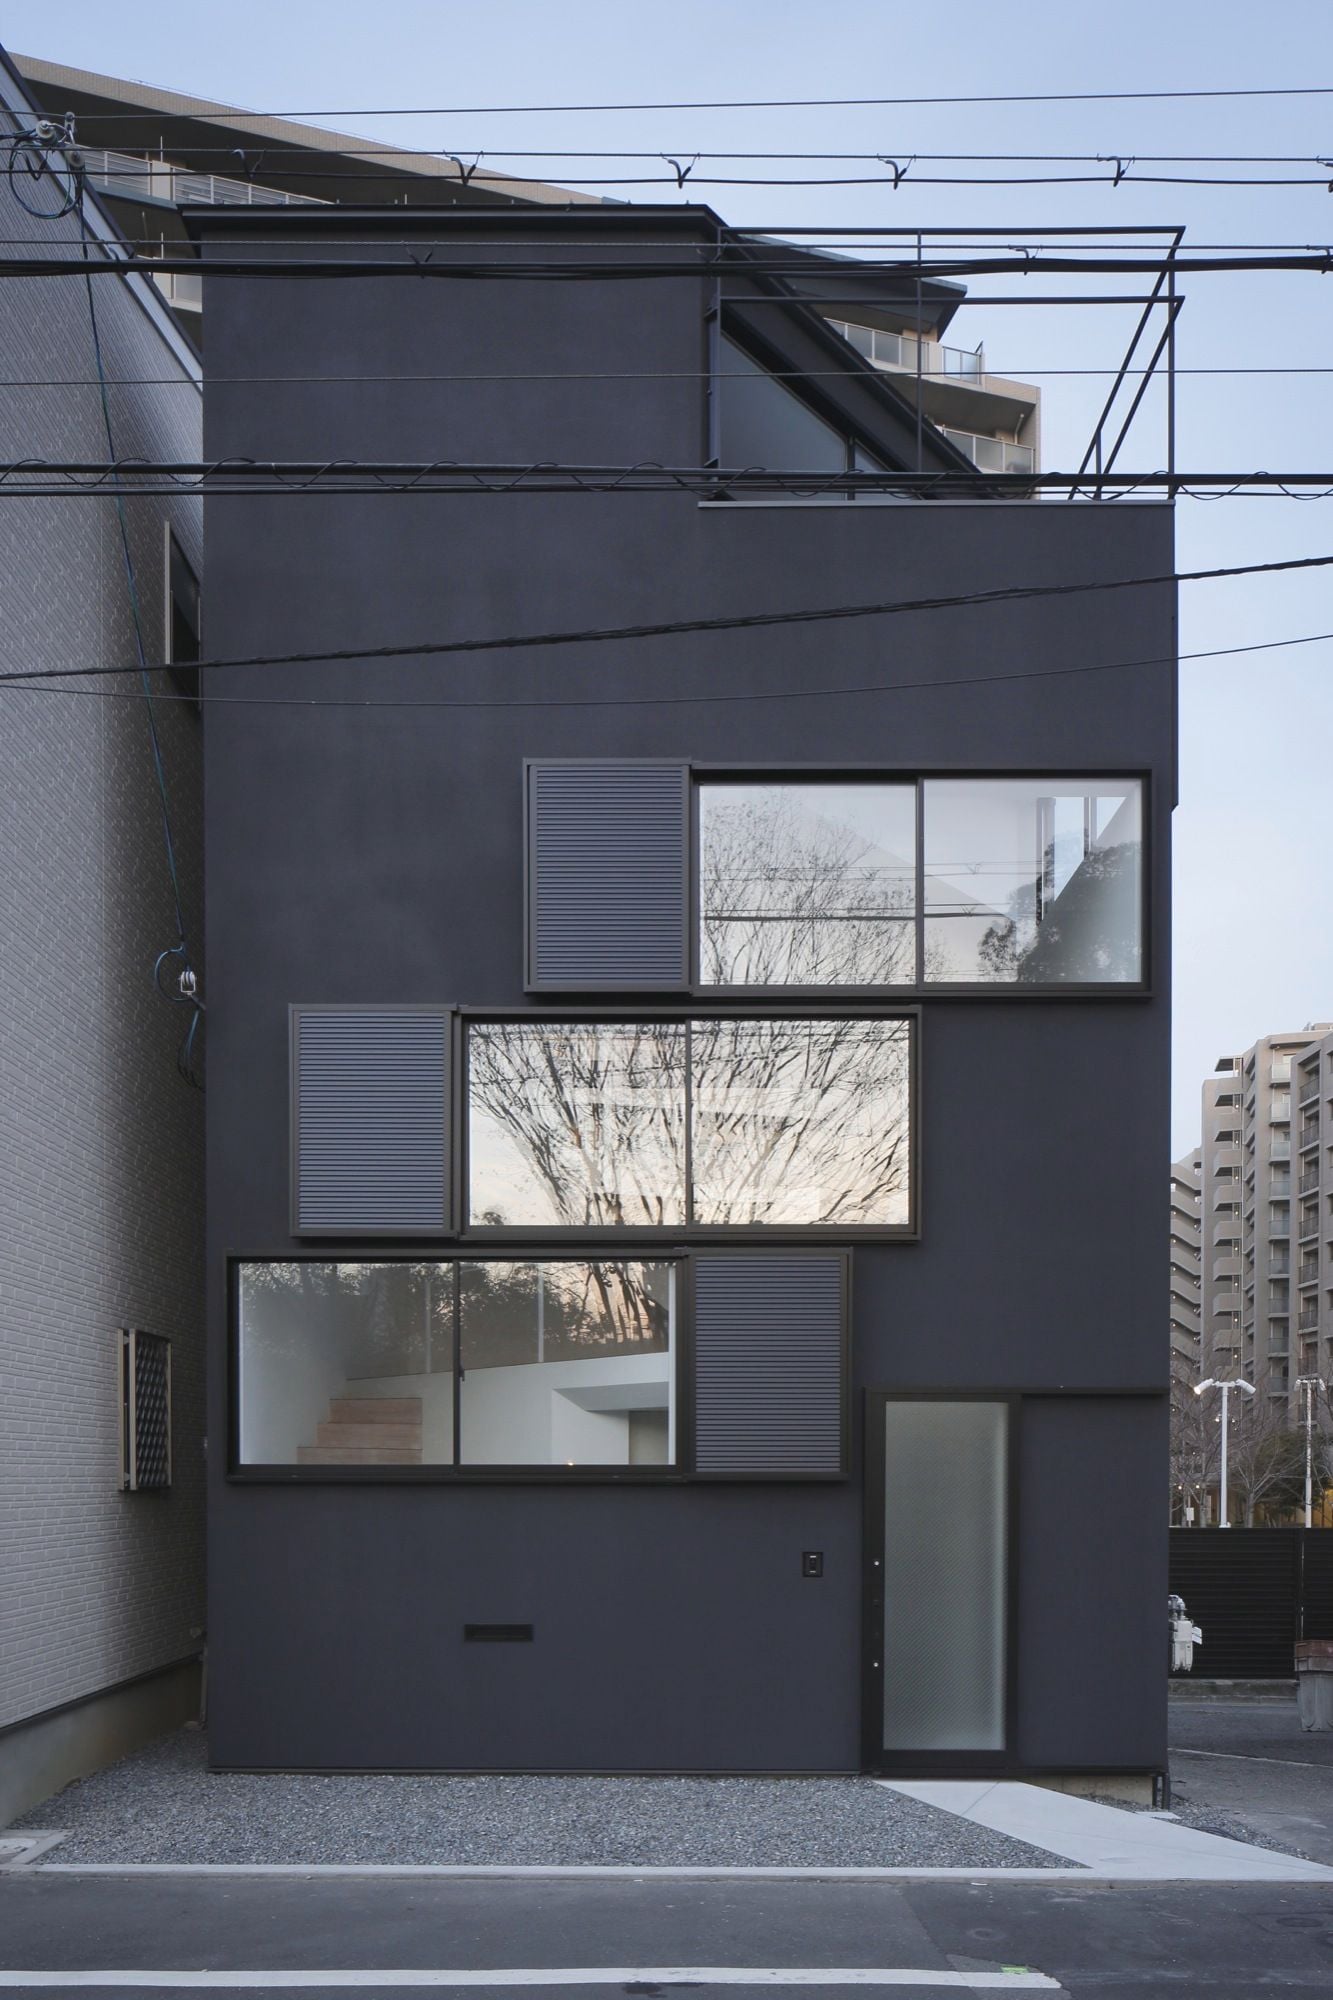 Visually striking geometric facade of a family home in Osaka, designed by Alphaville Architects.